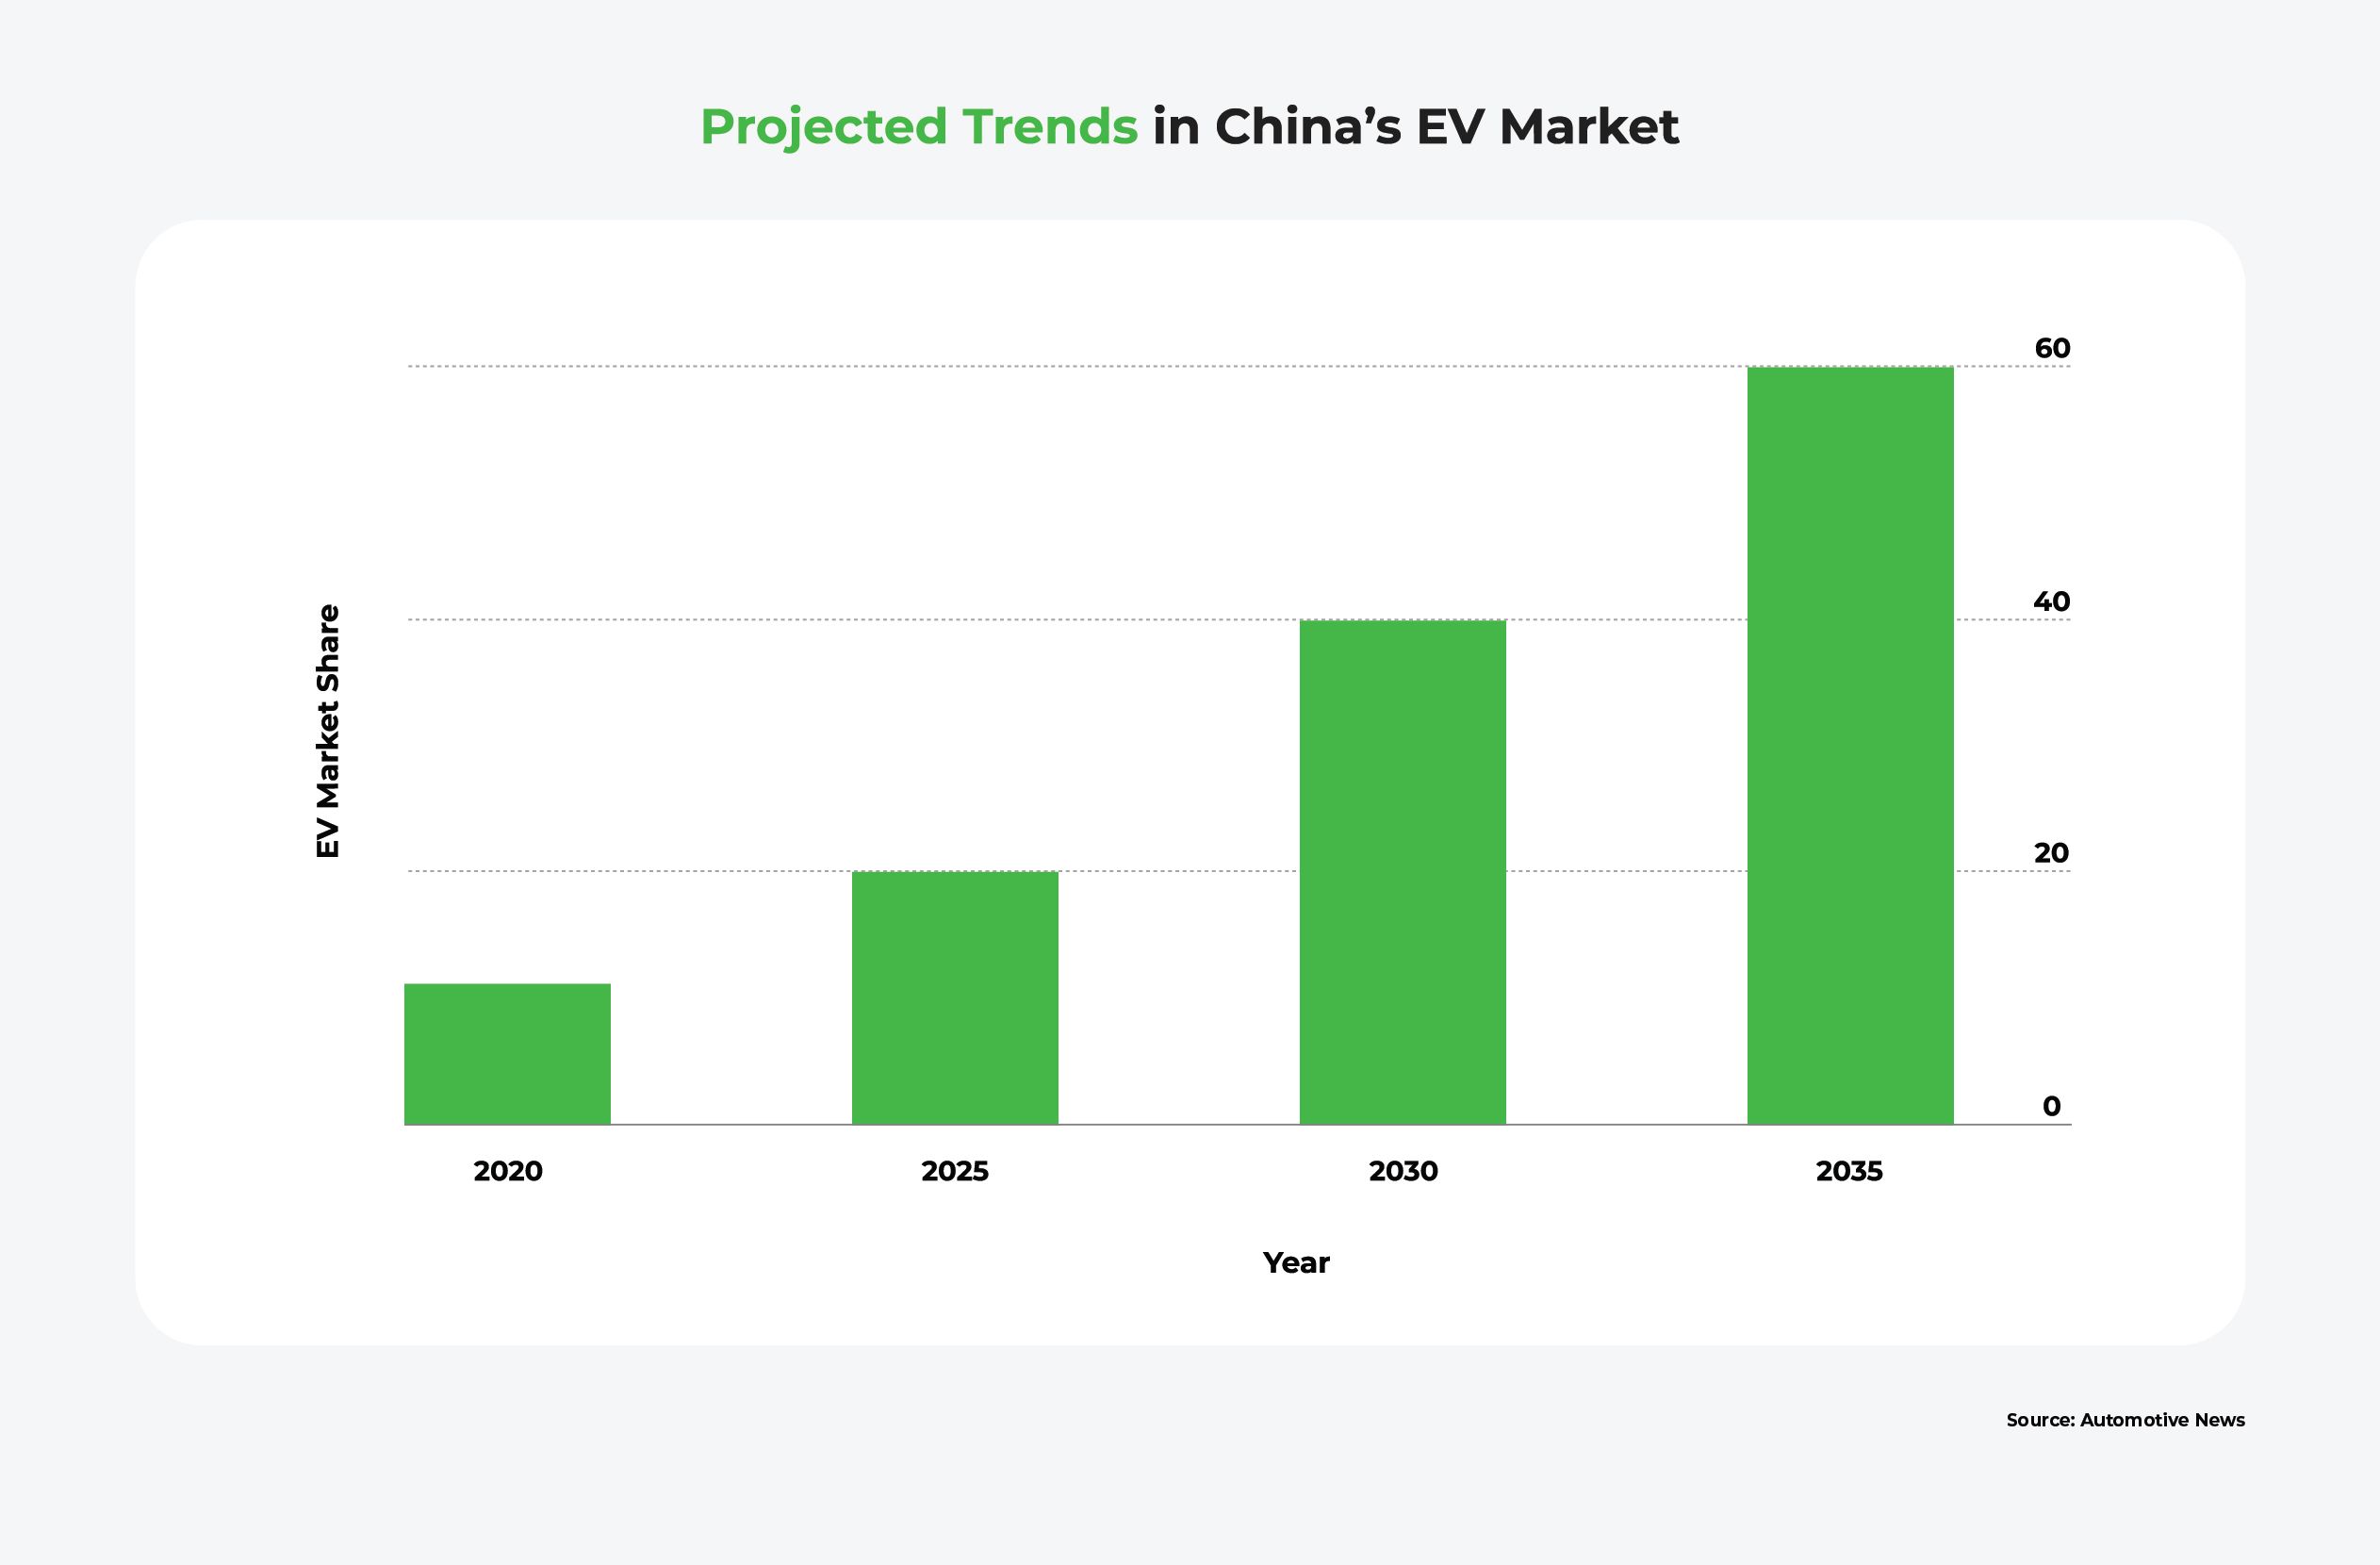 A bar chart showing China's projected EV sales between 2020 and 2035